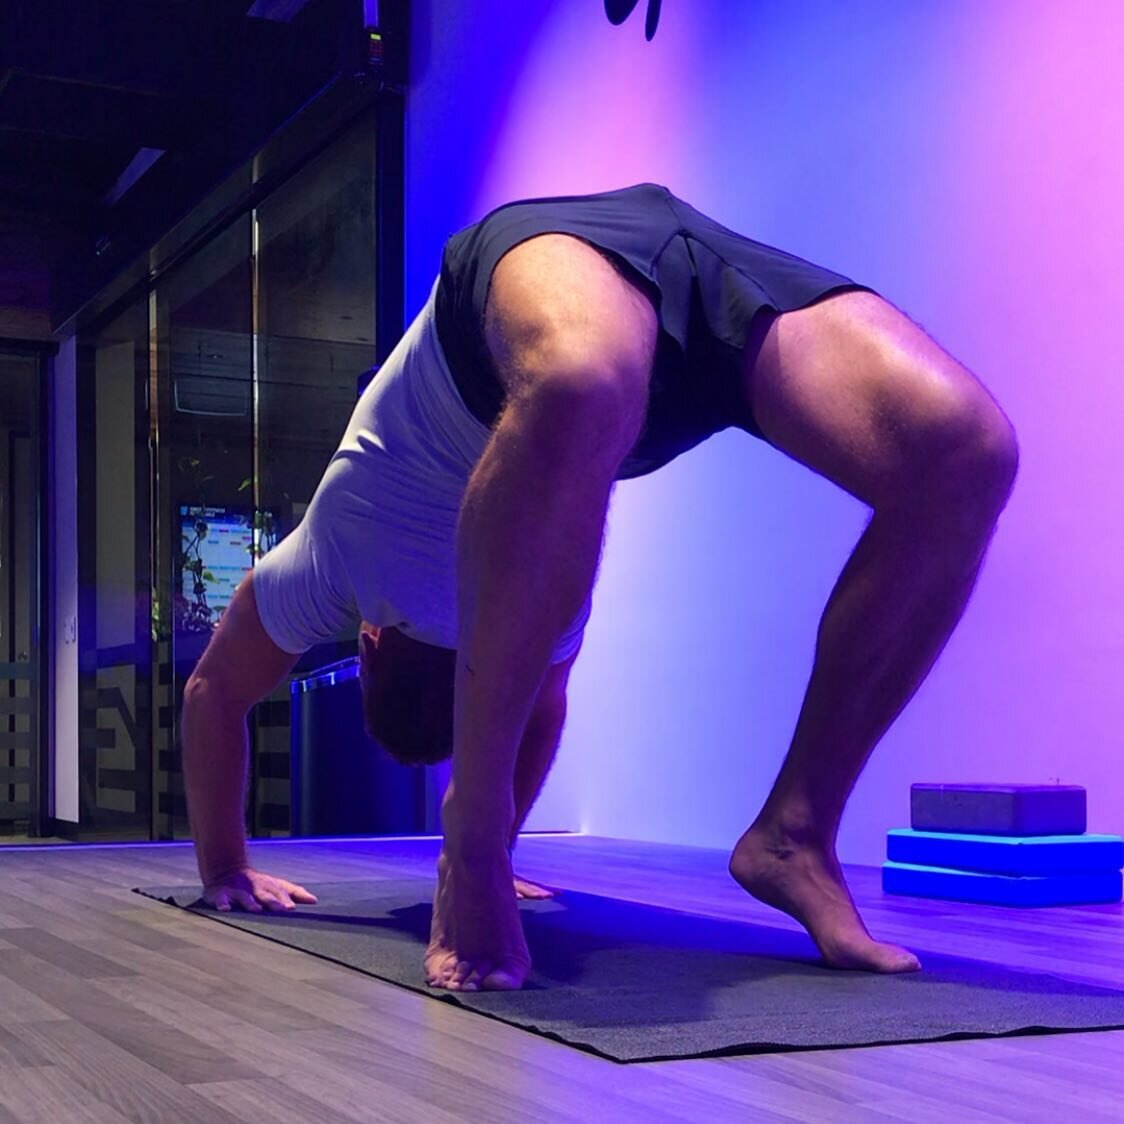 Workshopping wheel this coming month of February as me move in opening the heart - both in class and practice and everyday life. Looking for ways to create space. 

Wheel pose - upward facing bow pose,  urdhva Dhanurasana - is an intense back bend - 